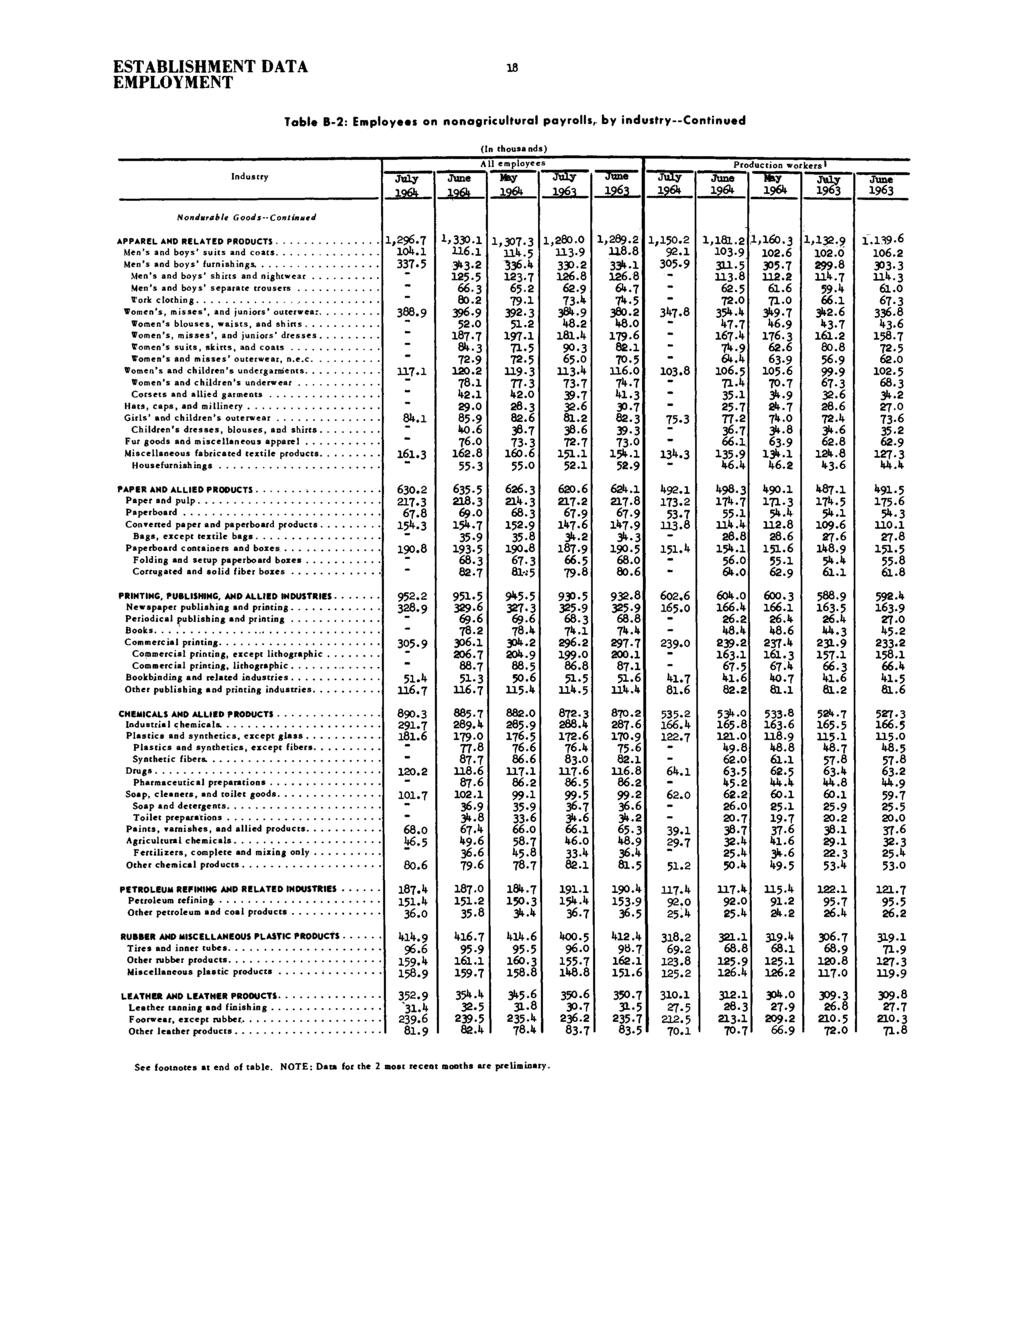 EMPLOYMENT 18 Table B-2: Employees on nonagricultural payrolls, by industry Continued (In thousands) Industry All employee Production workers' Nondurable Goods Continued APPAREL AND RELATED PRODUCTS